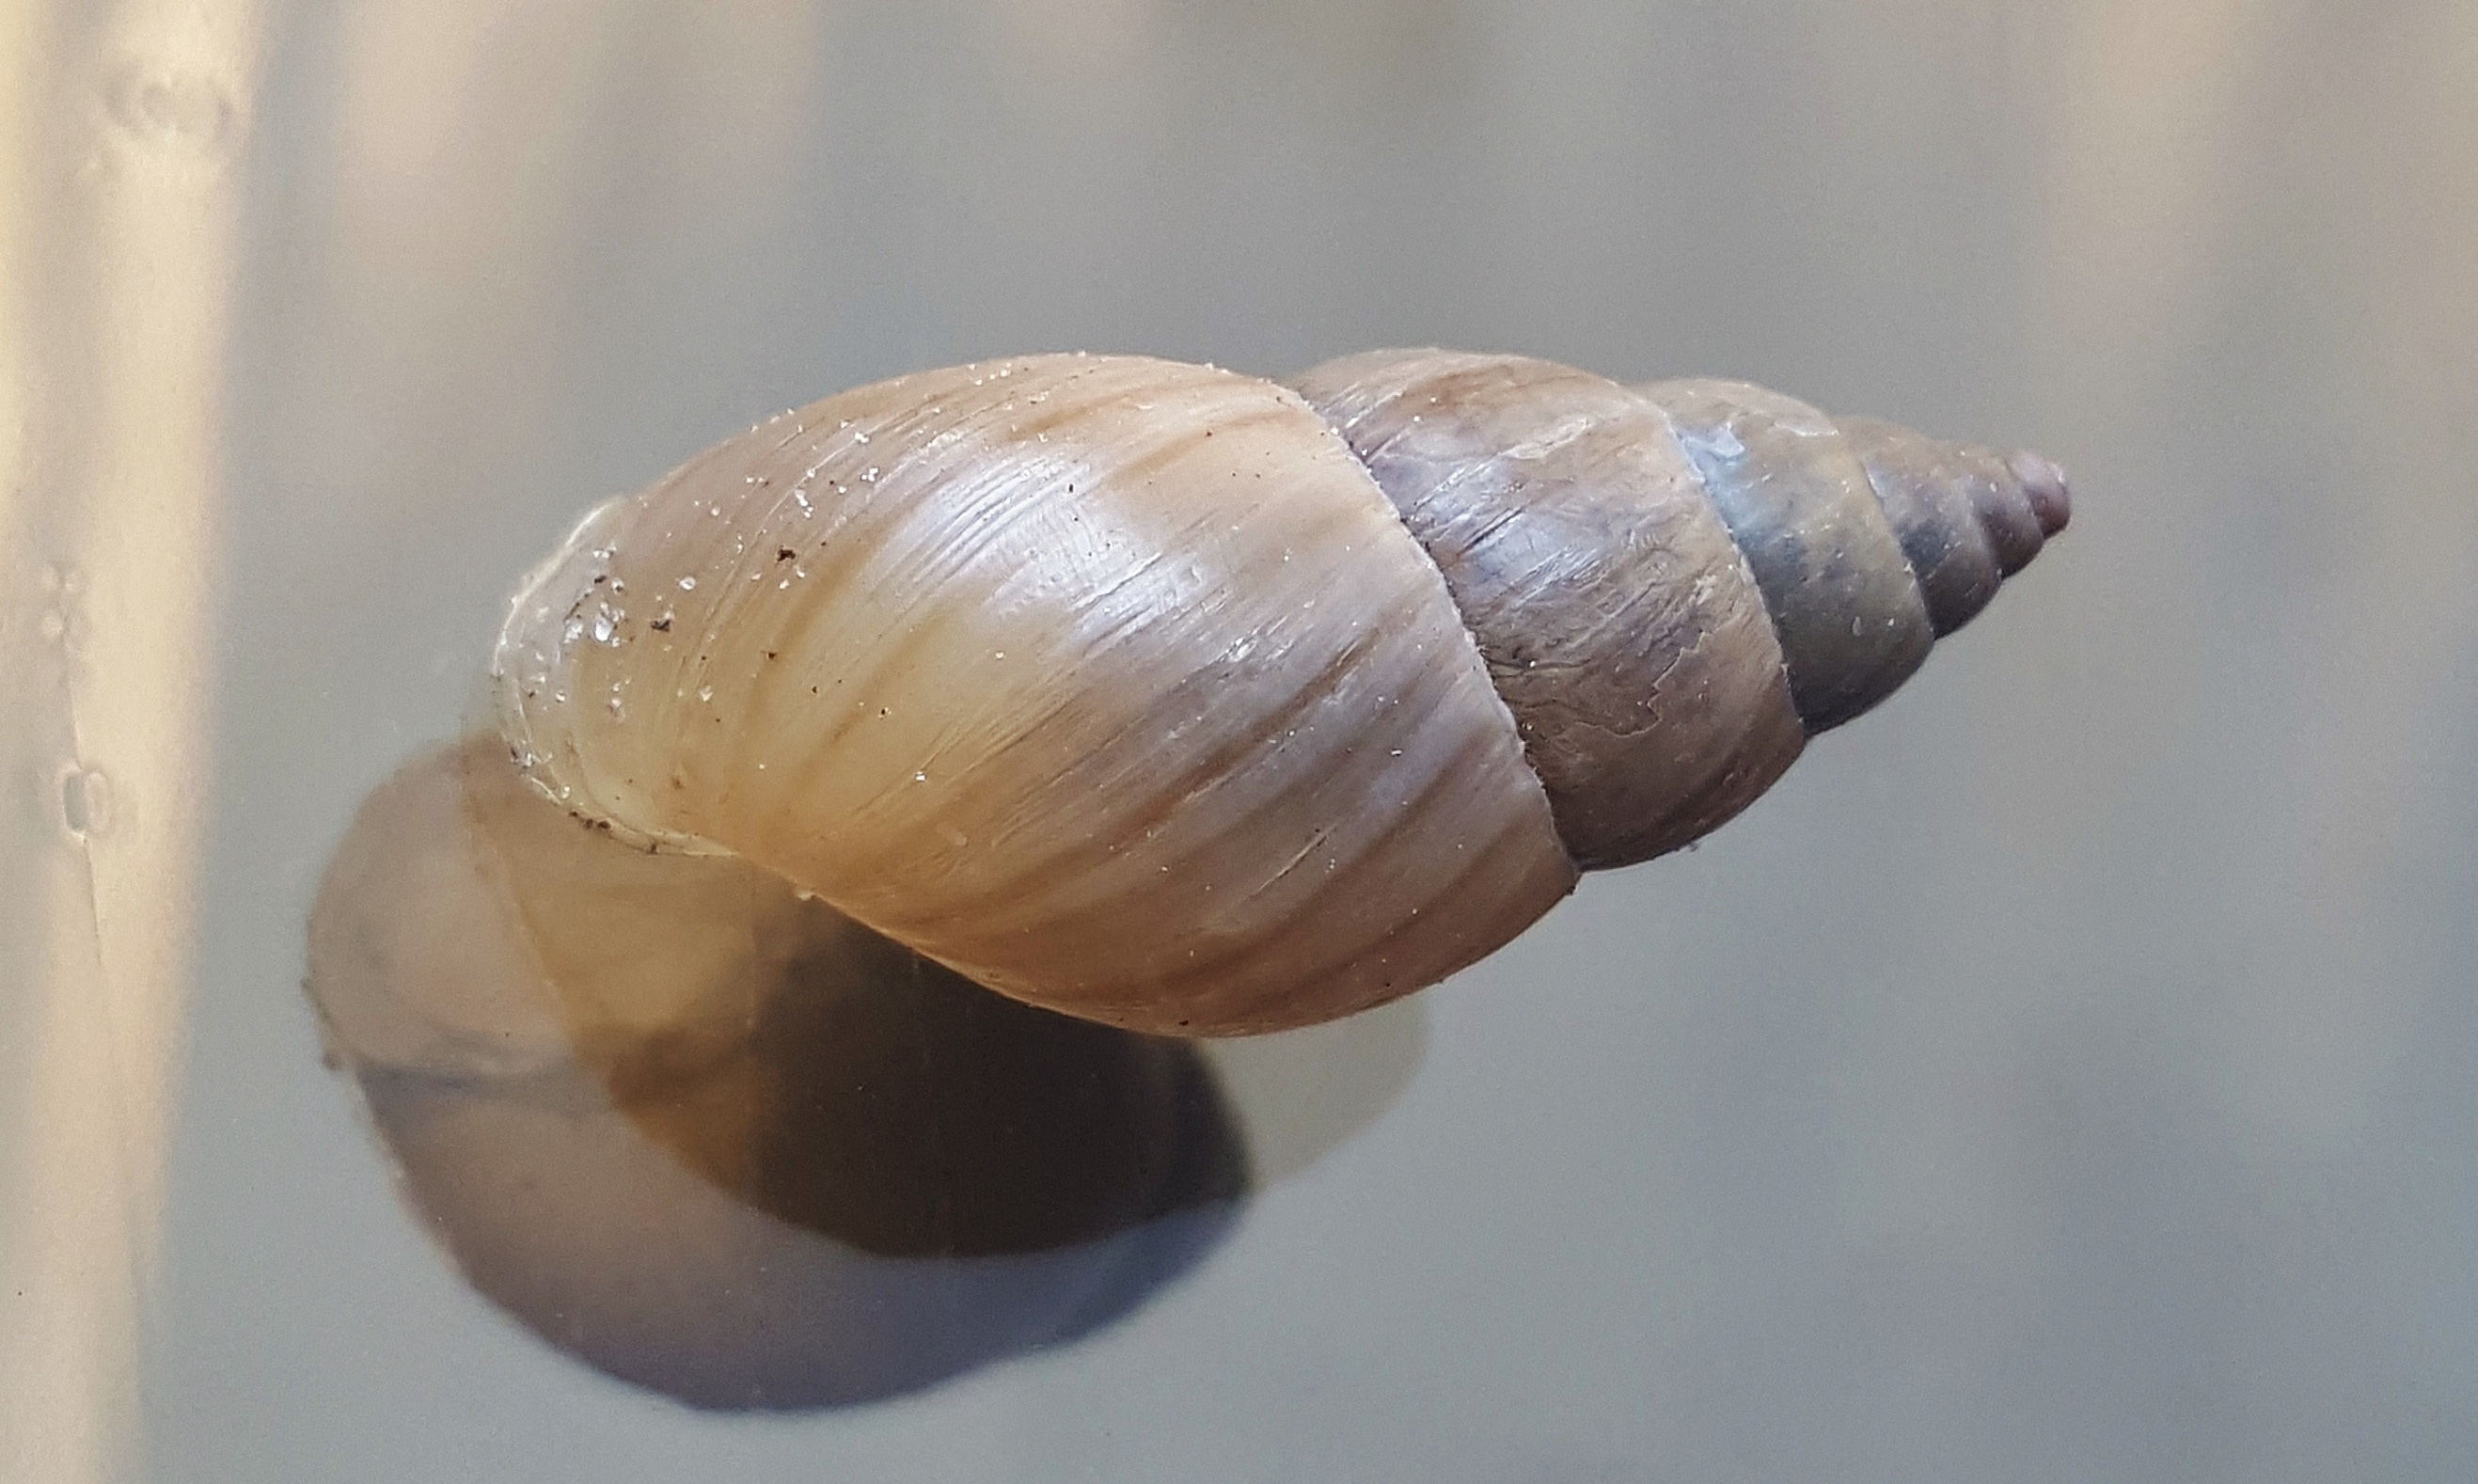 Free Images : nature, spiral, biology, cone, fauna, shell ...